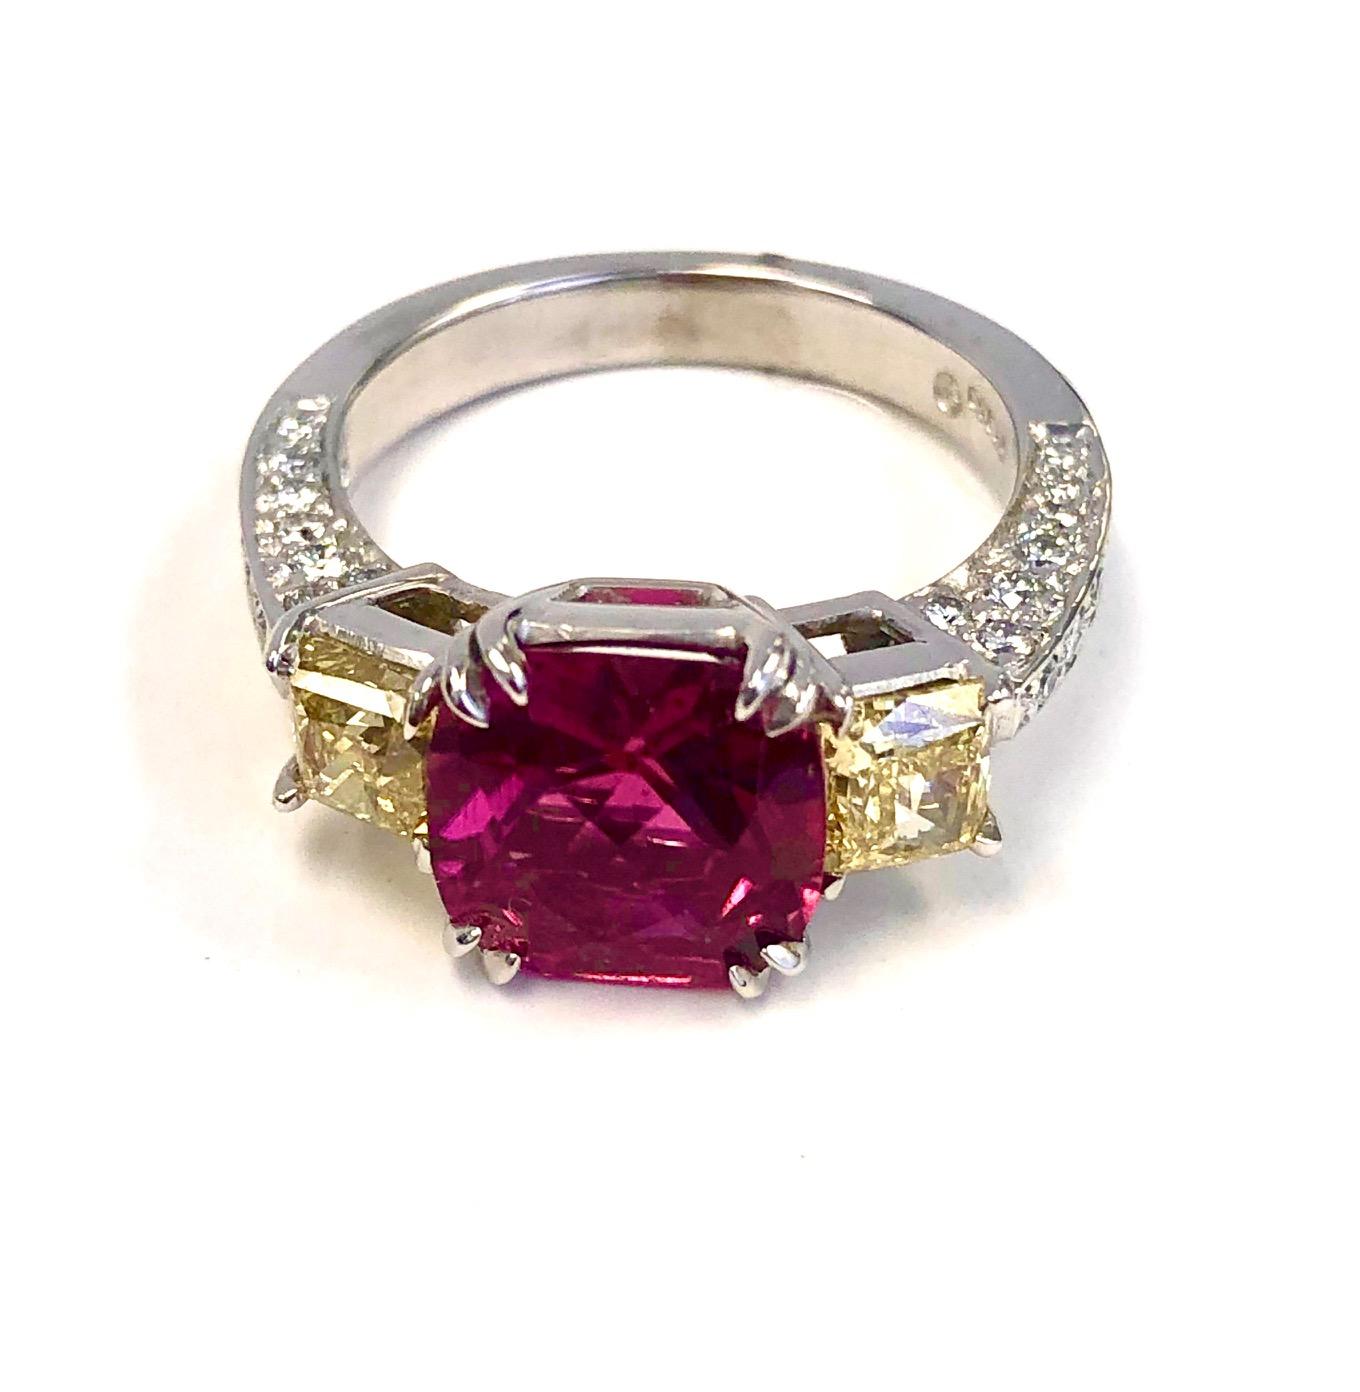 A very elegant Ring design, set with 38 round Diamonds 0.58 carats, 2 Vivid Yellow Diamonds 1.06 carats and a perfect Pink Tourmaline 2.55 carats.

We design and manufacture our jewelry in our workshop, located in New York City's diamond district.